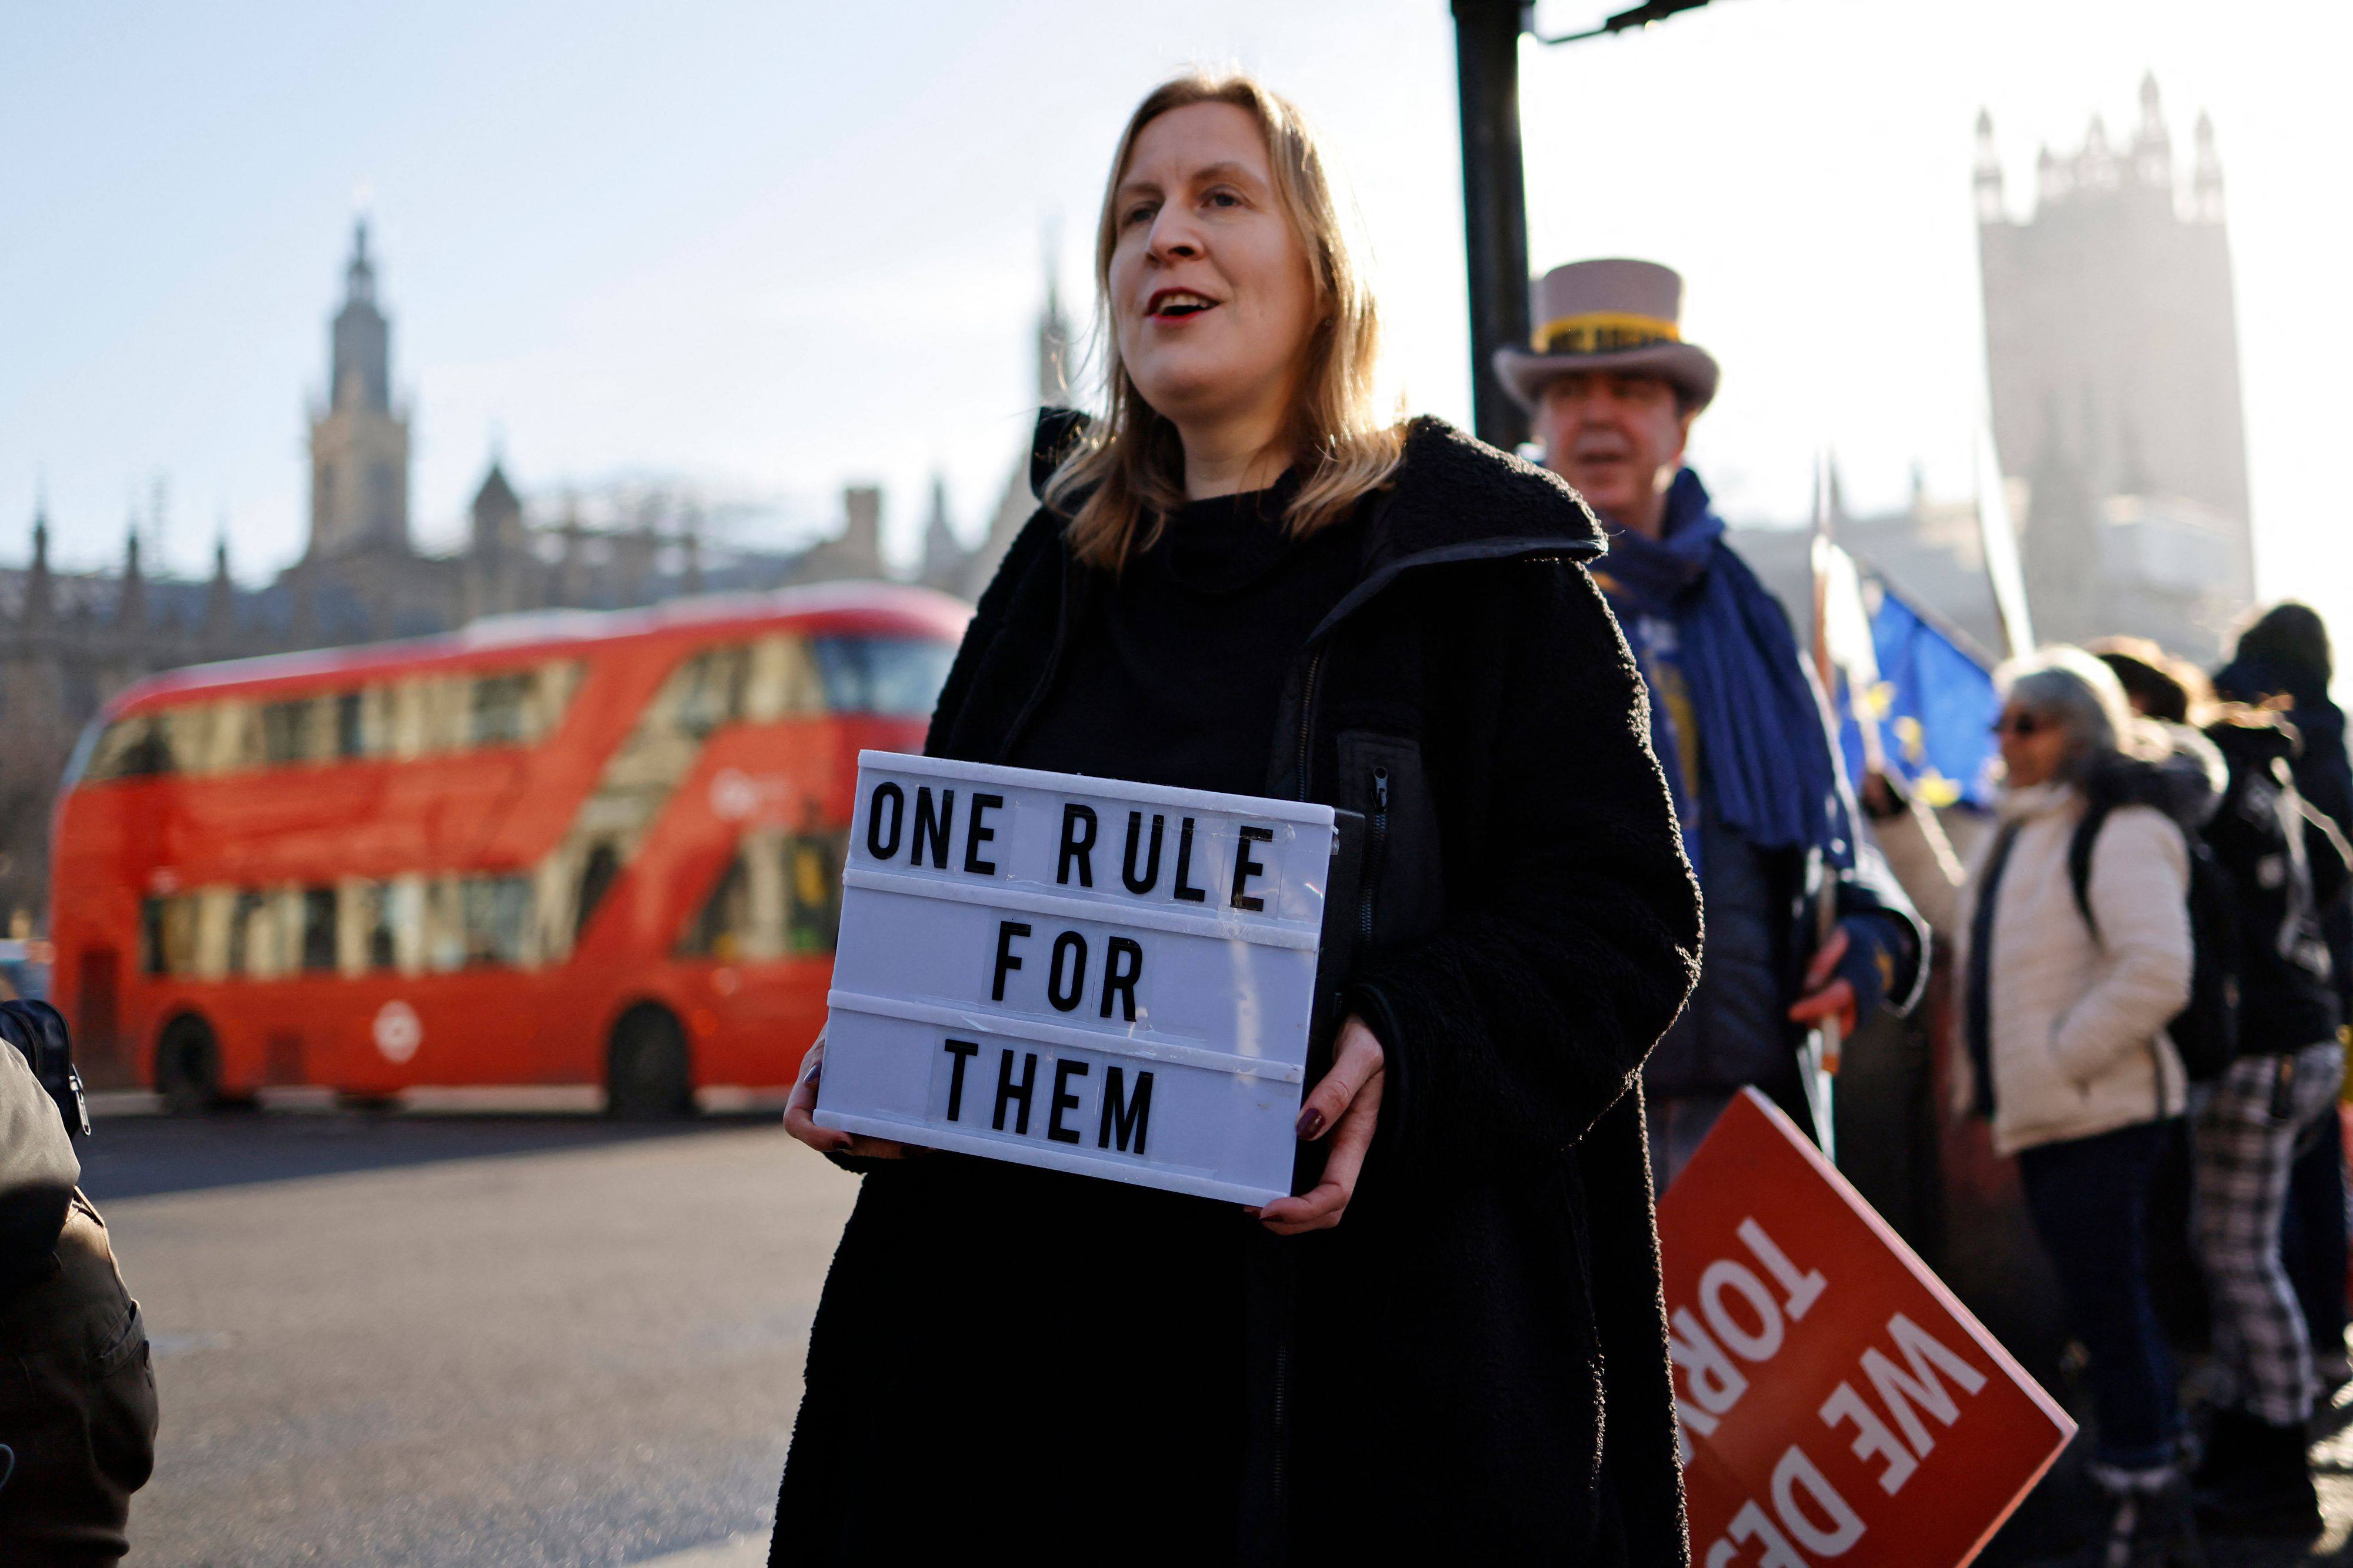 Protesters near the House of Commons in London in January 2022 after former Prime Minister Boris Johnson apologised for attending a coronavirus lockdown-breaching party in Downing Street. Photo: AFP